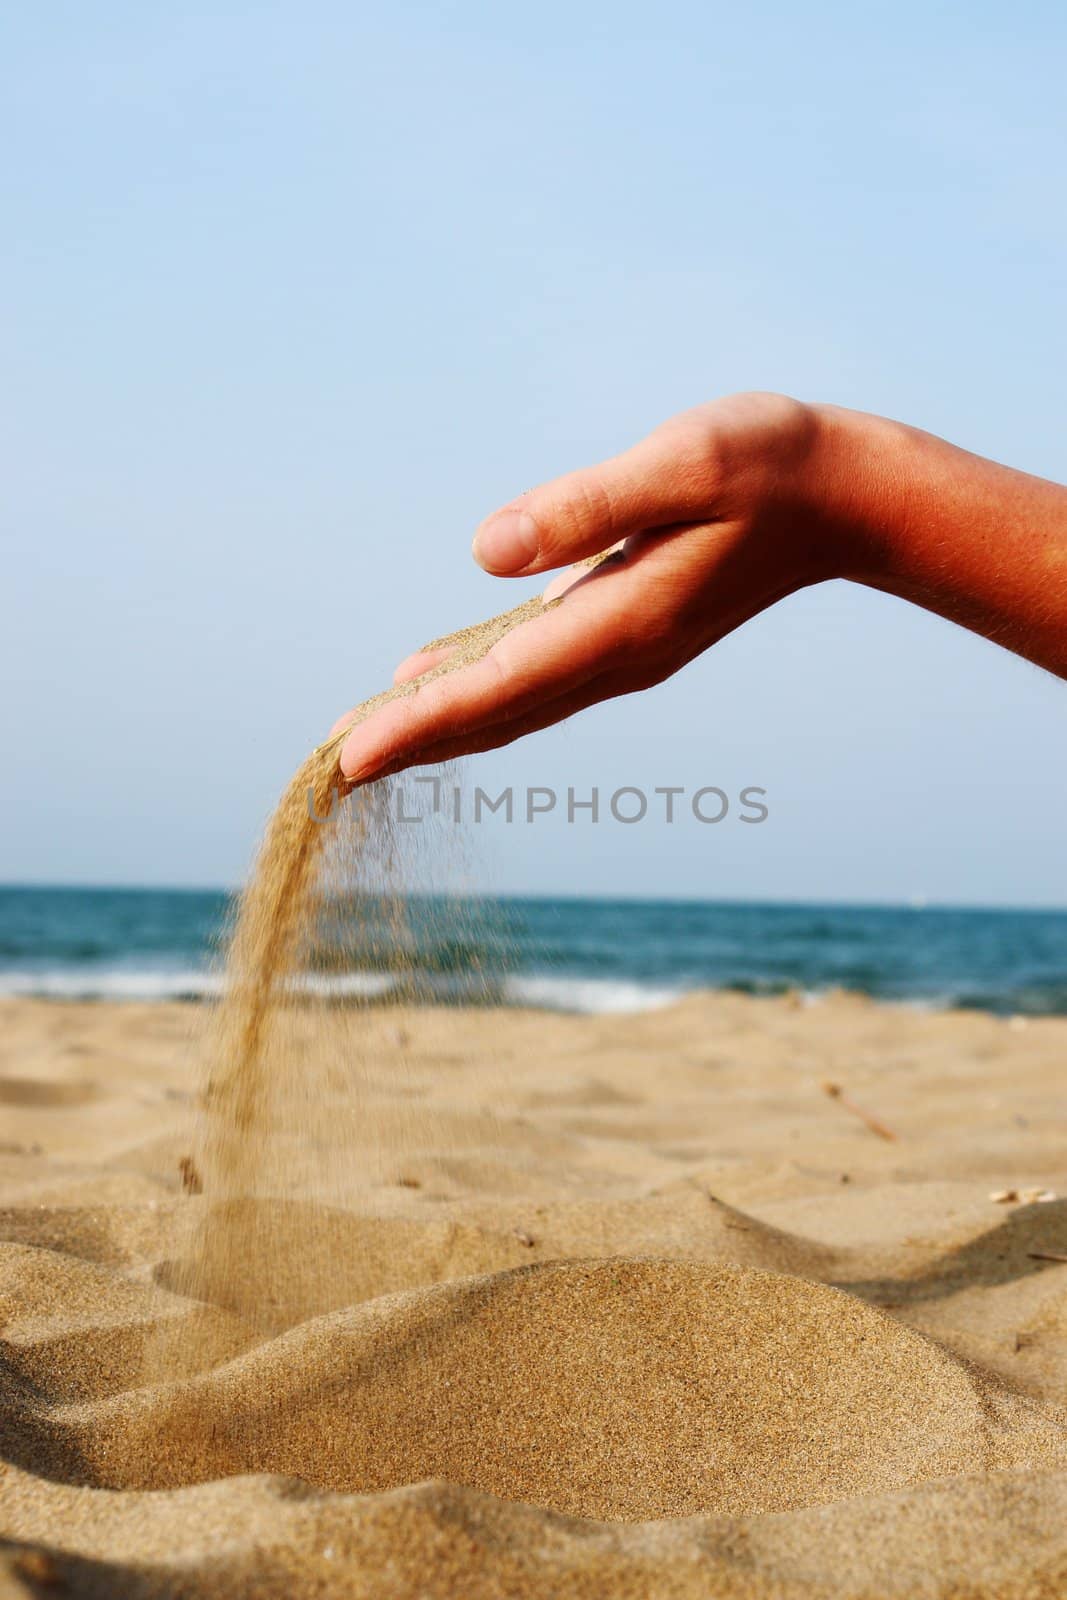 sand running through hands as a symbol for time running, lost etc.............